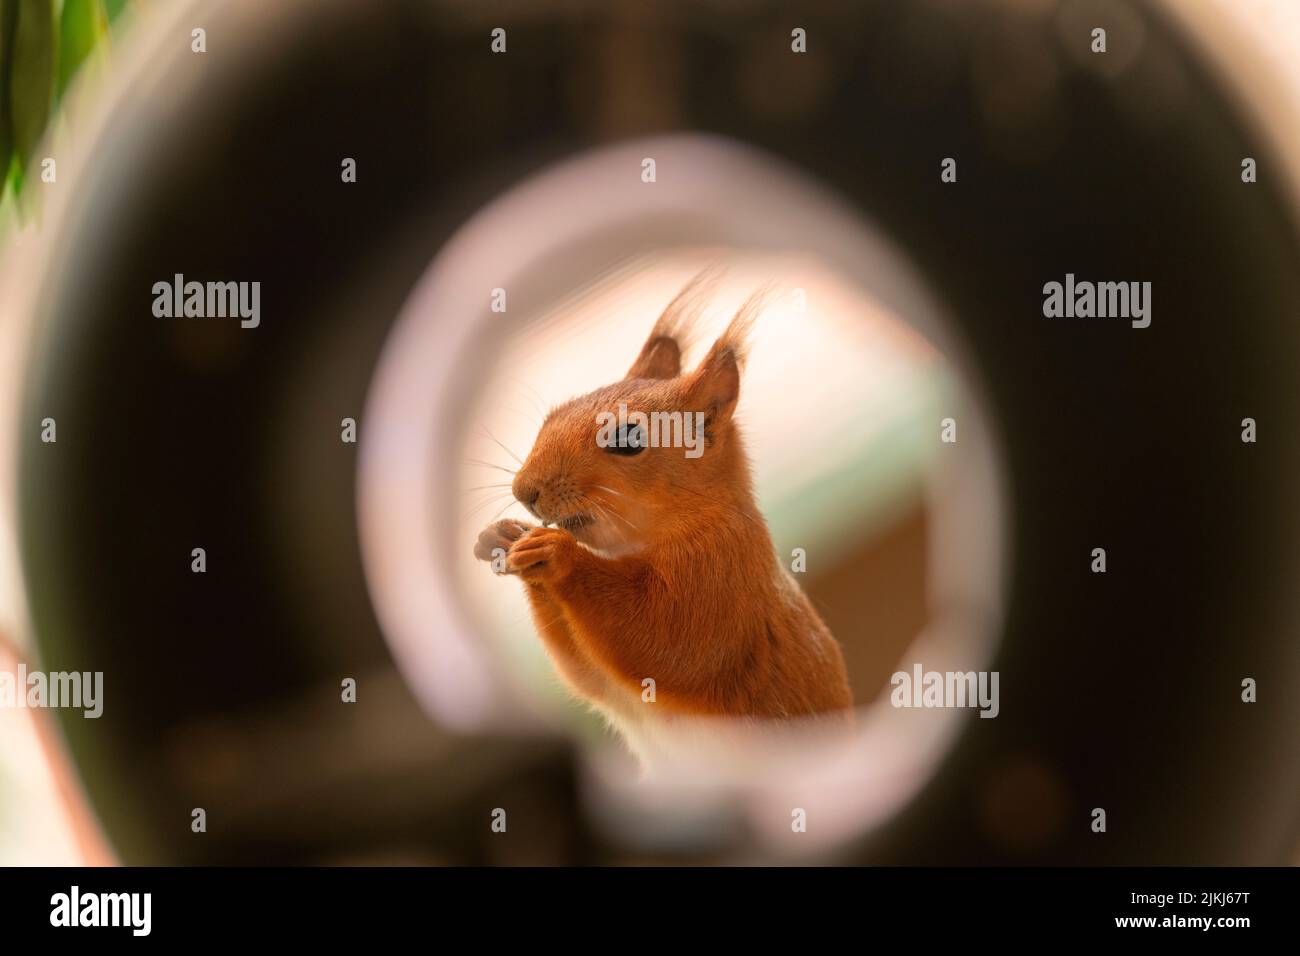 Red Squirrel close up in a frame Stock Photo